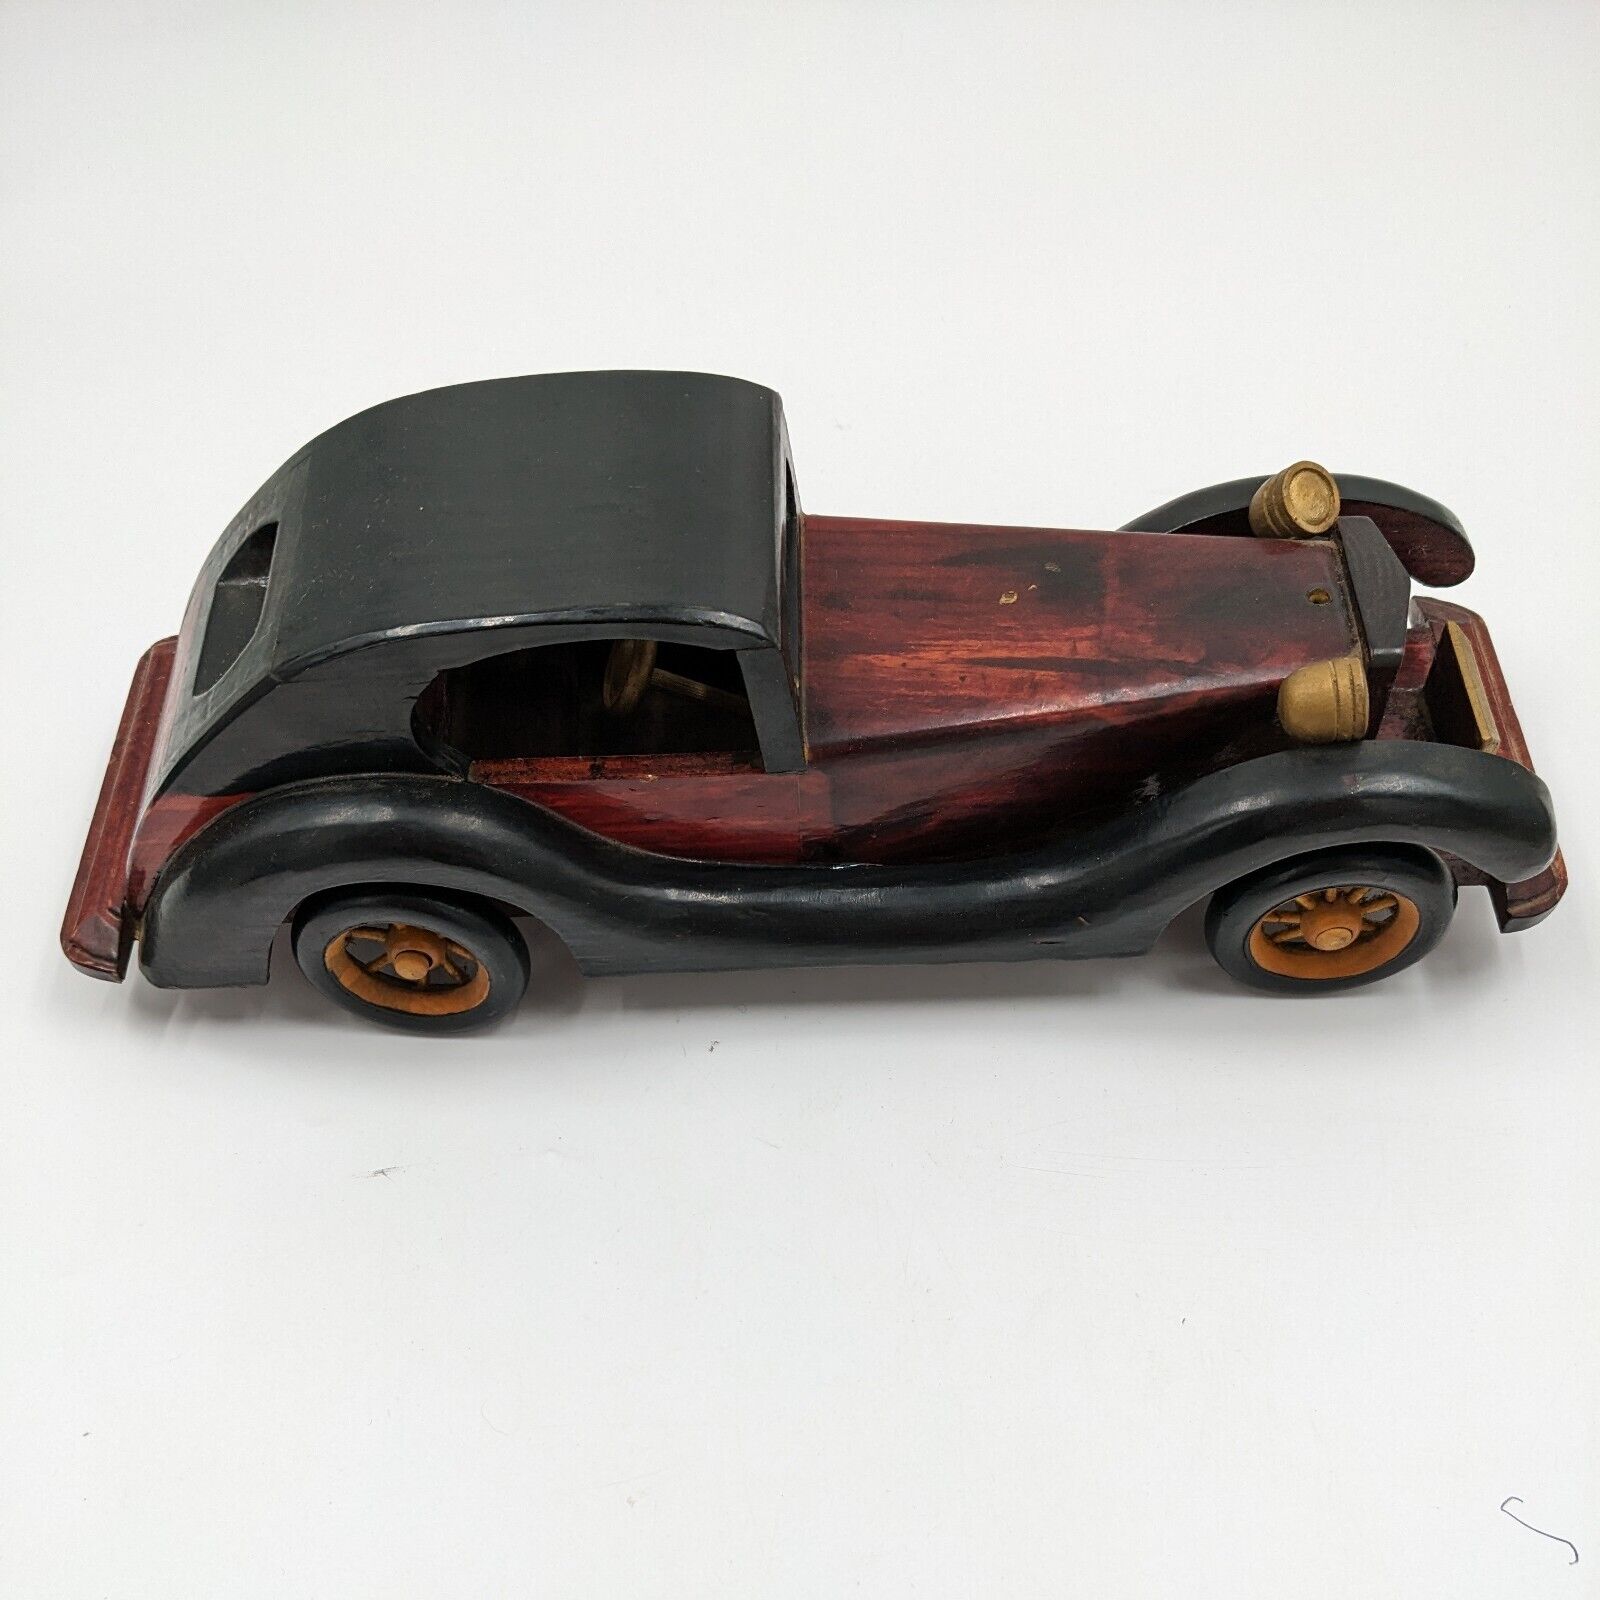 Vintage All Wood Classic Antique 1930s Car Model Display Collectible Vehicle